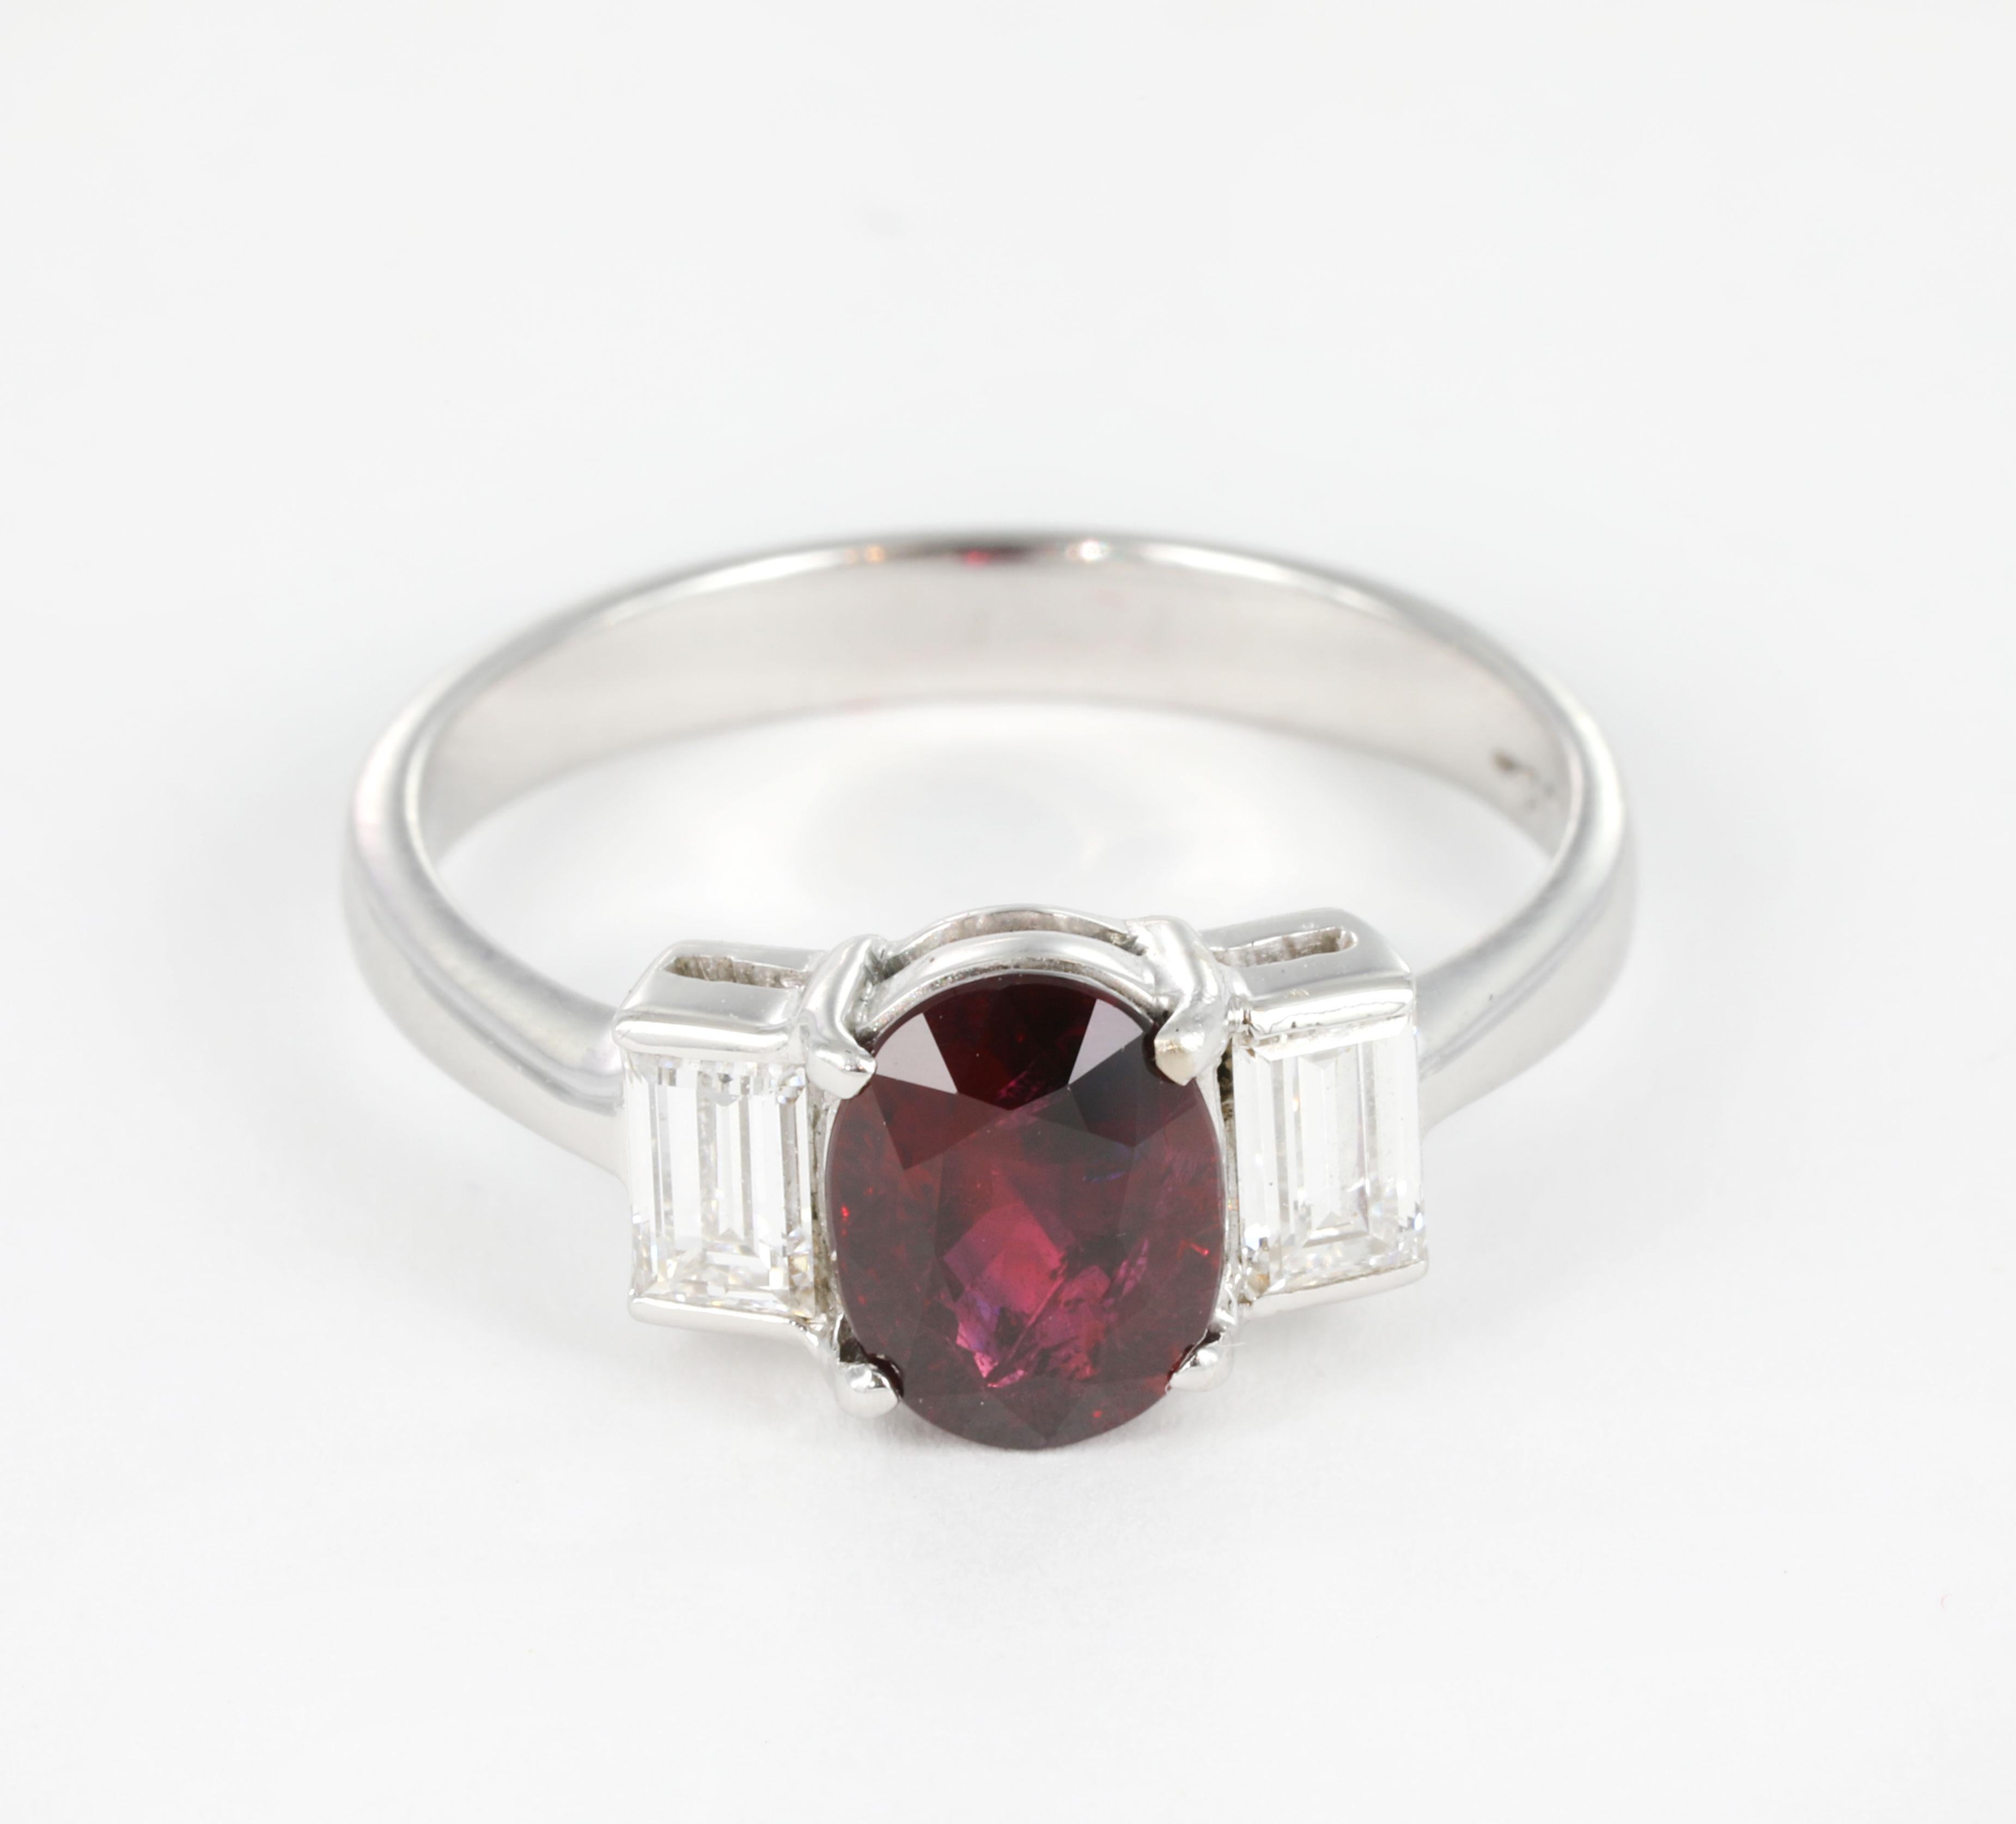 Unheated 1.54 Carat “Pigeon’s Blood” Ruby & Diamond 18K Gold Ring, GIA Certified For Sale 1